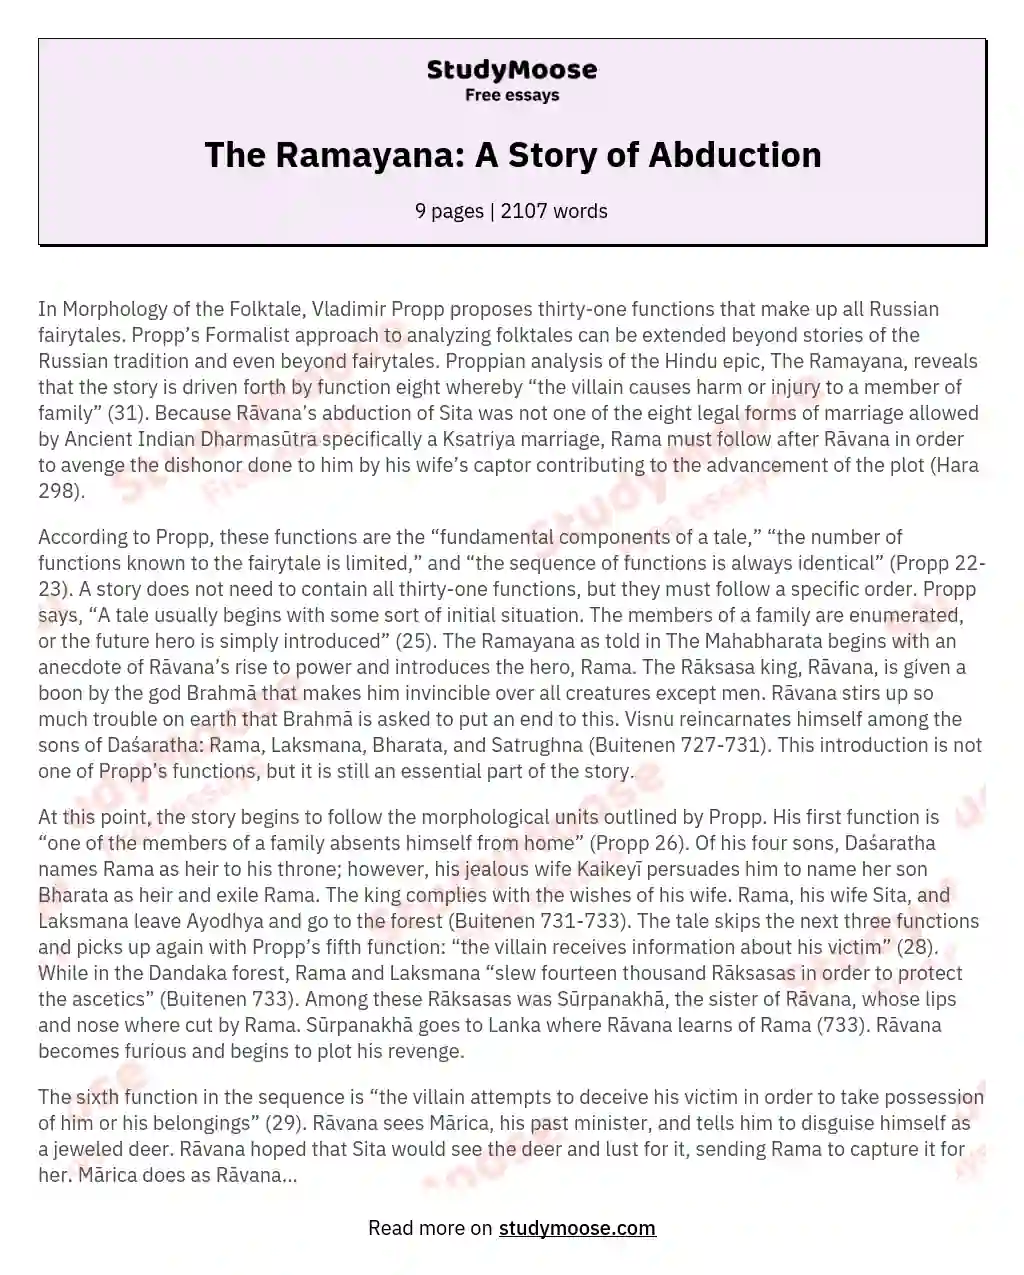 The Ramayana: A Story of Abduction essay